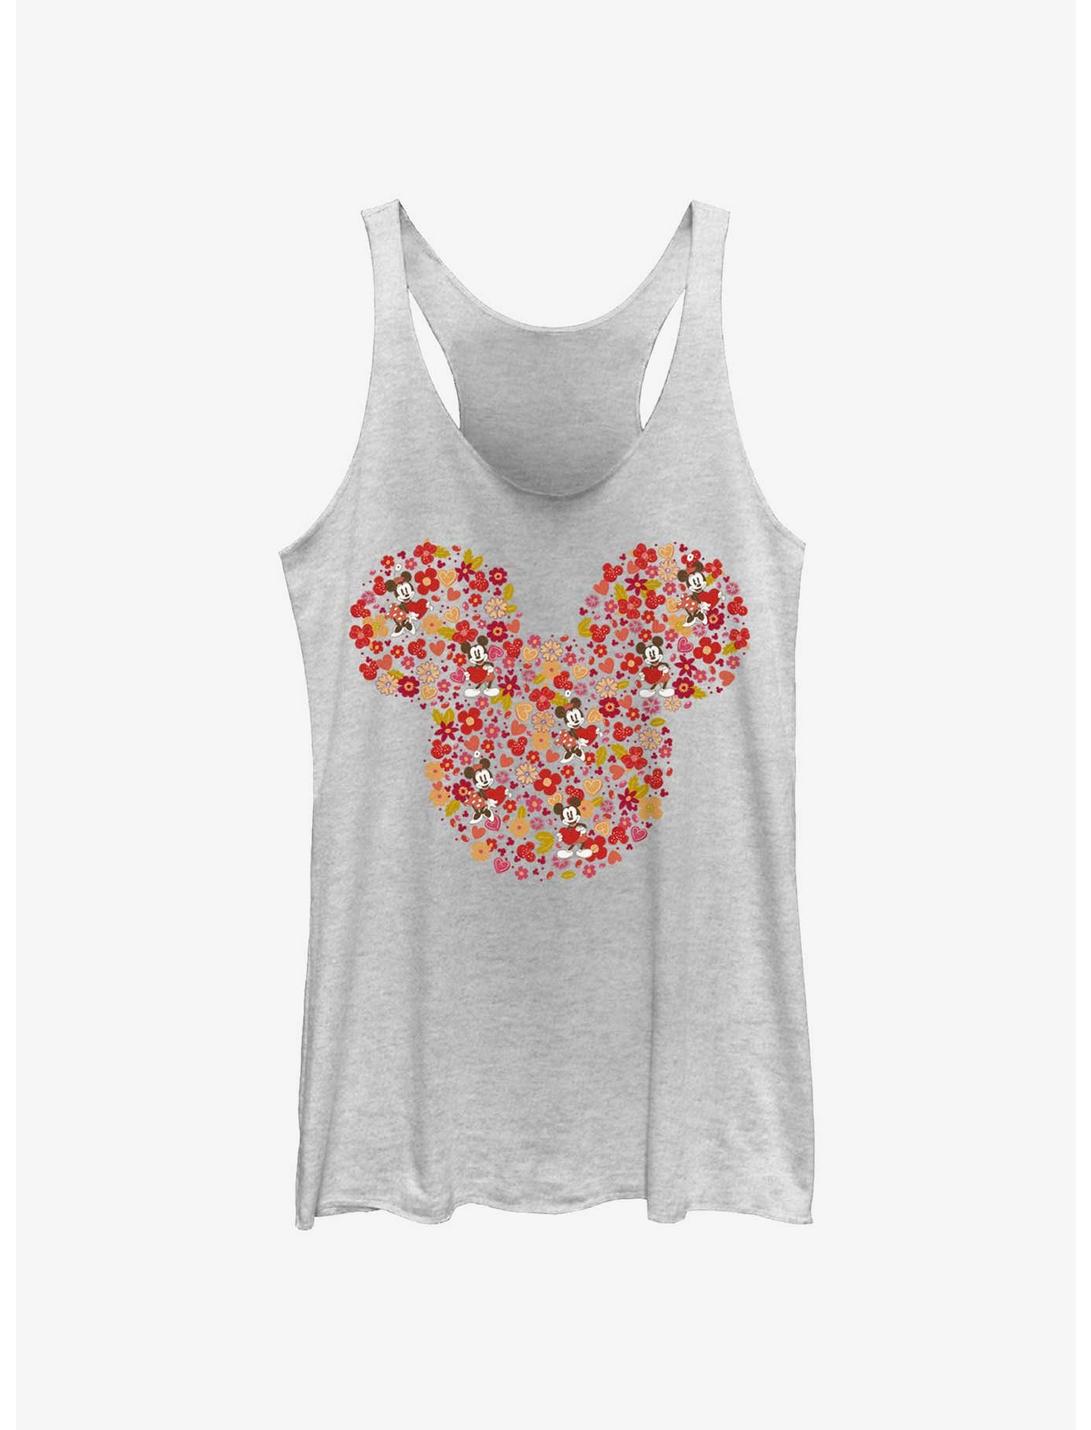 Disney Mickey Mouse Mickey Flowers Girls Tank, WHITE HTR, hi-res